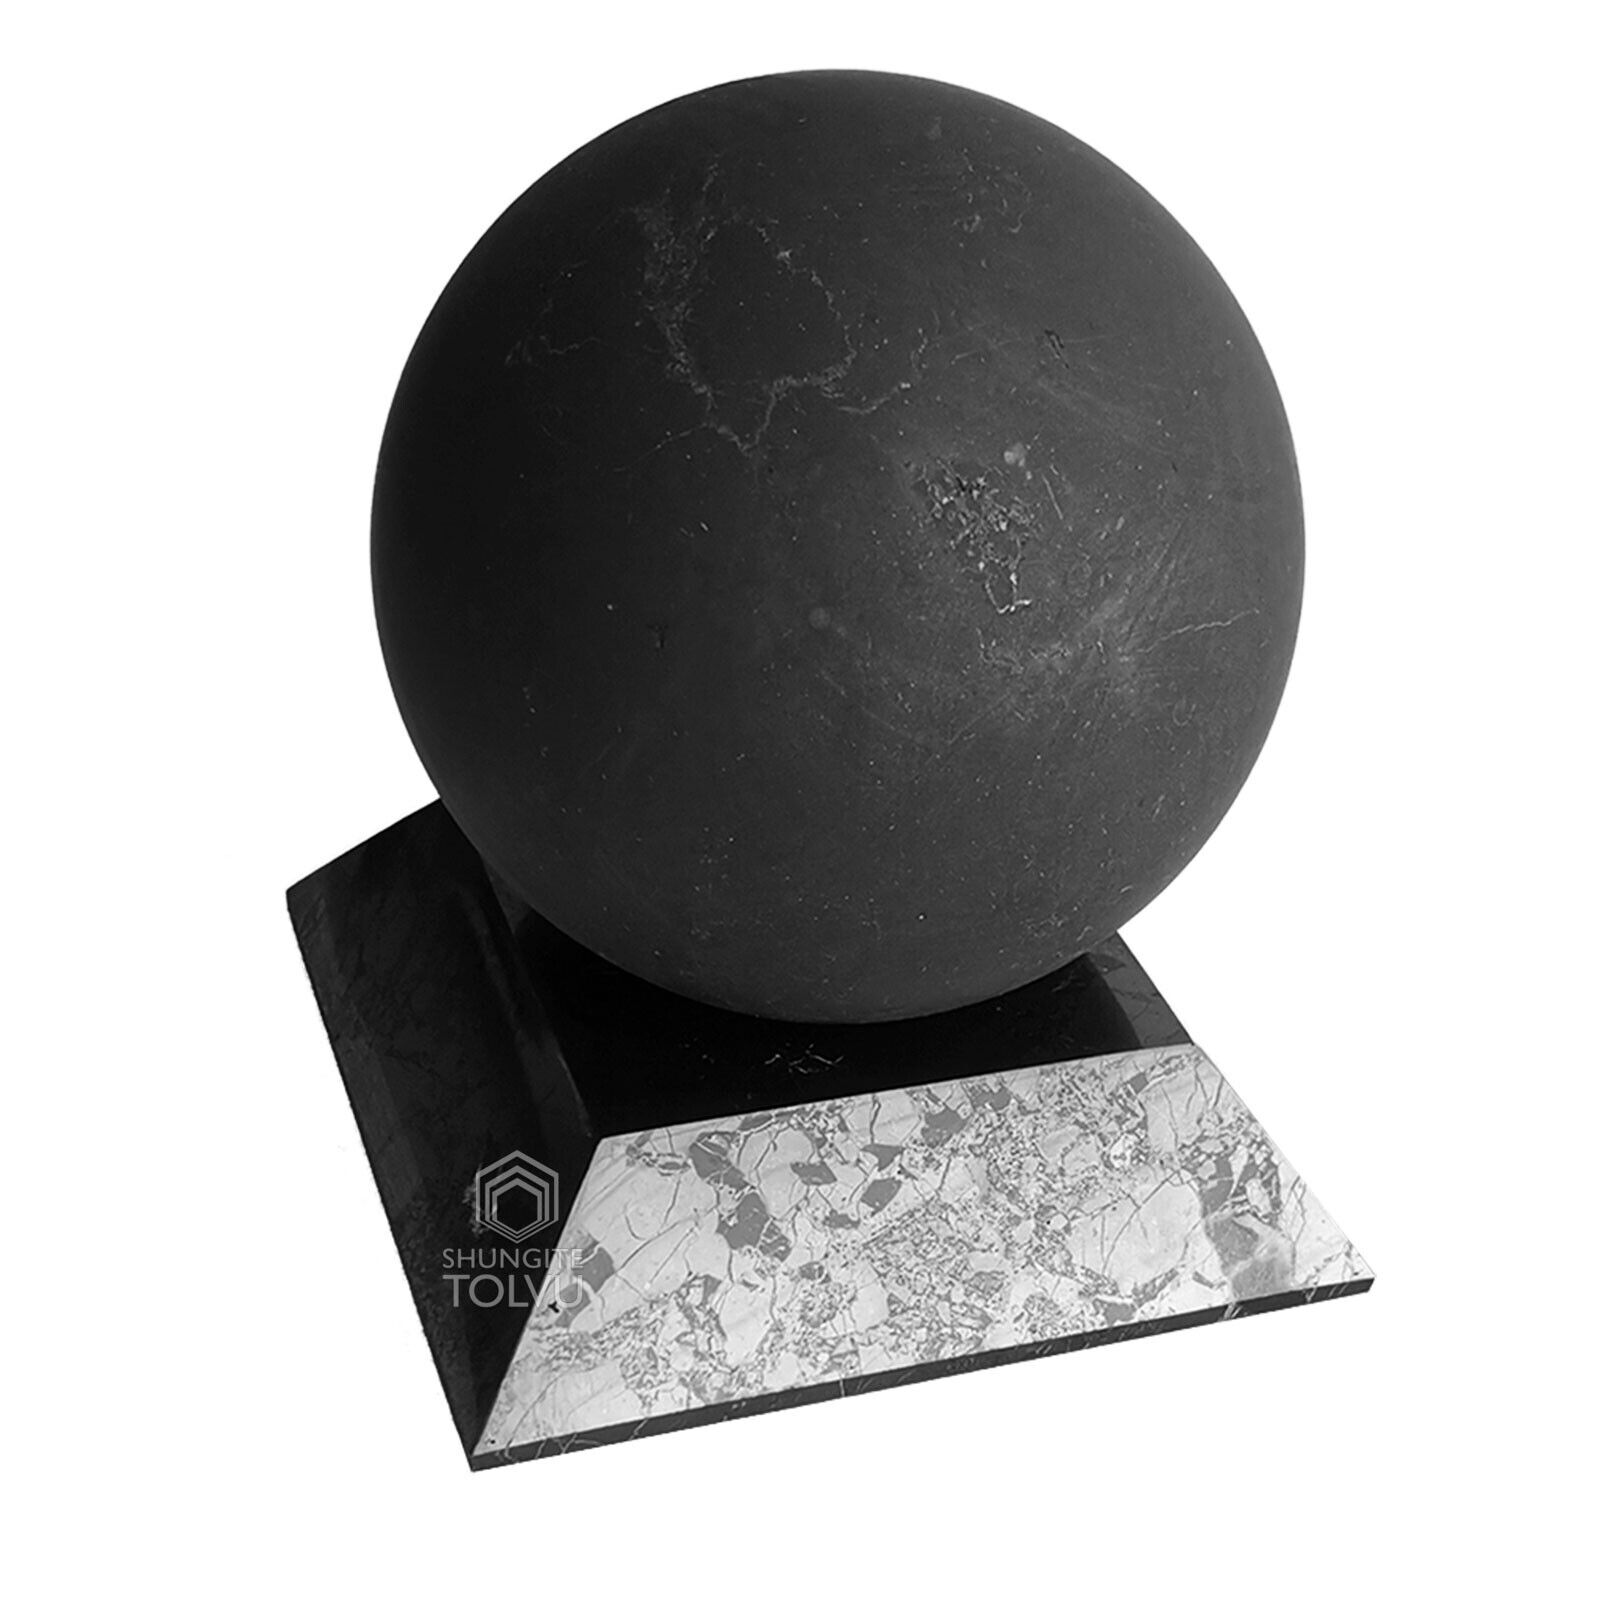 Real Shungite stone Sphere - Large size 3.5 in. Shungite stand included - Tolvu